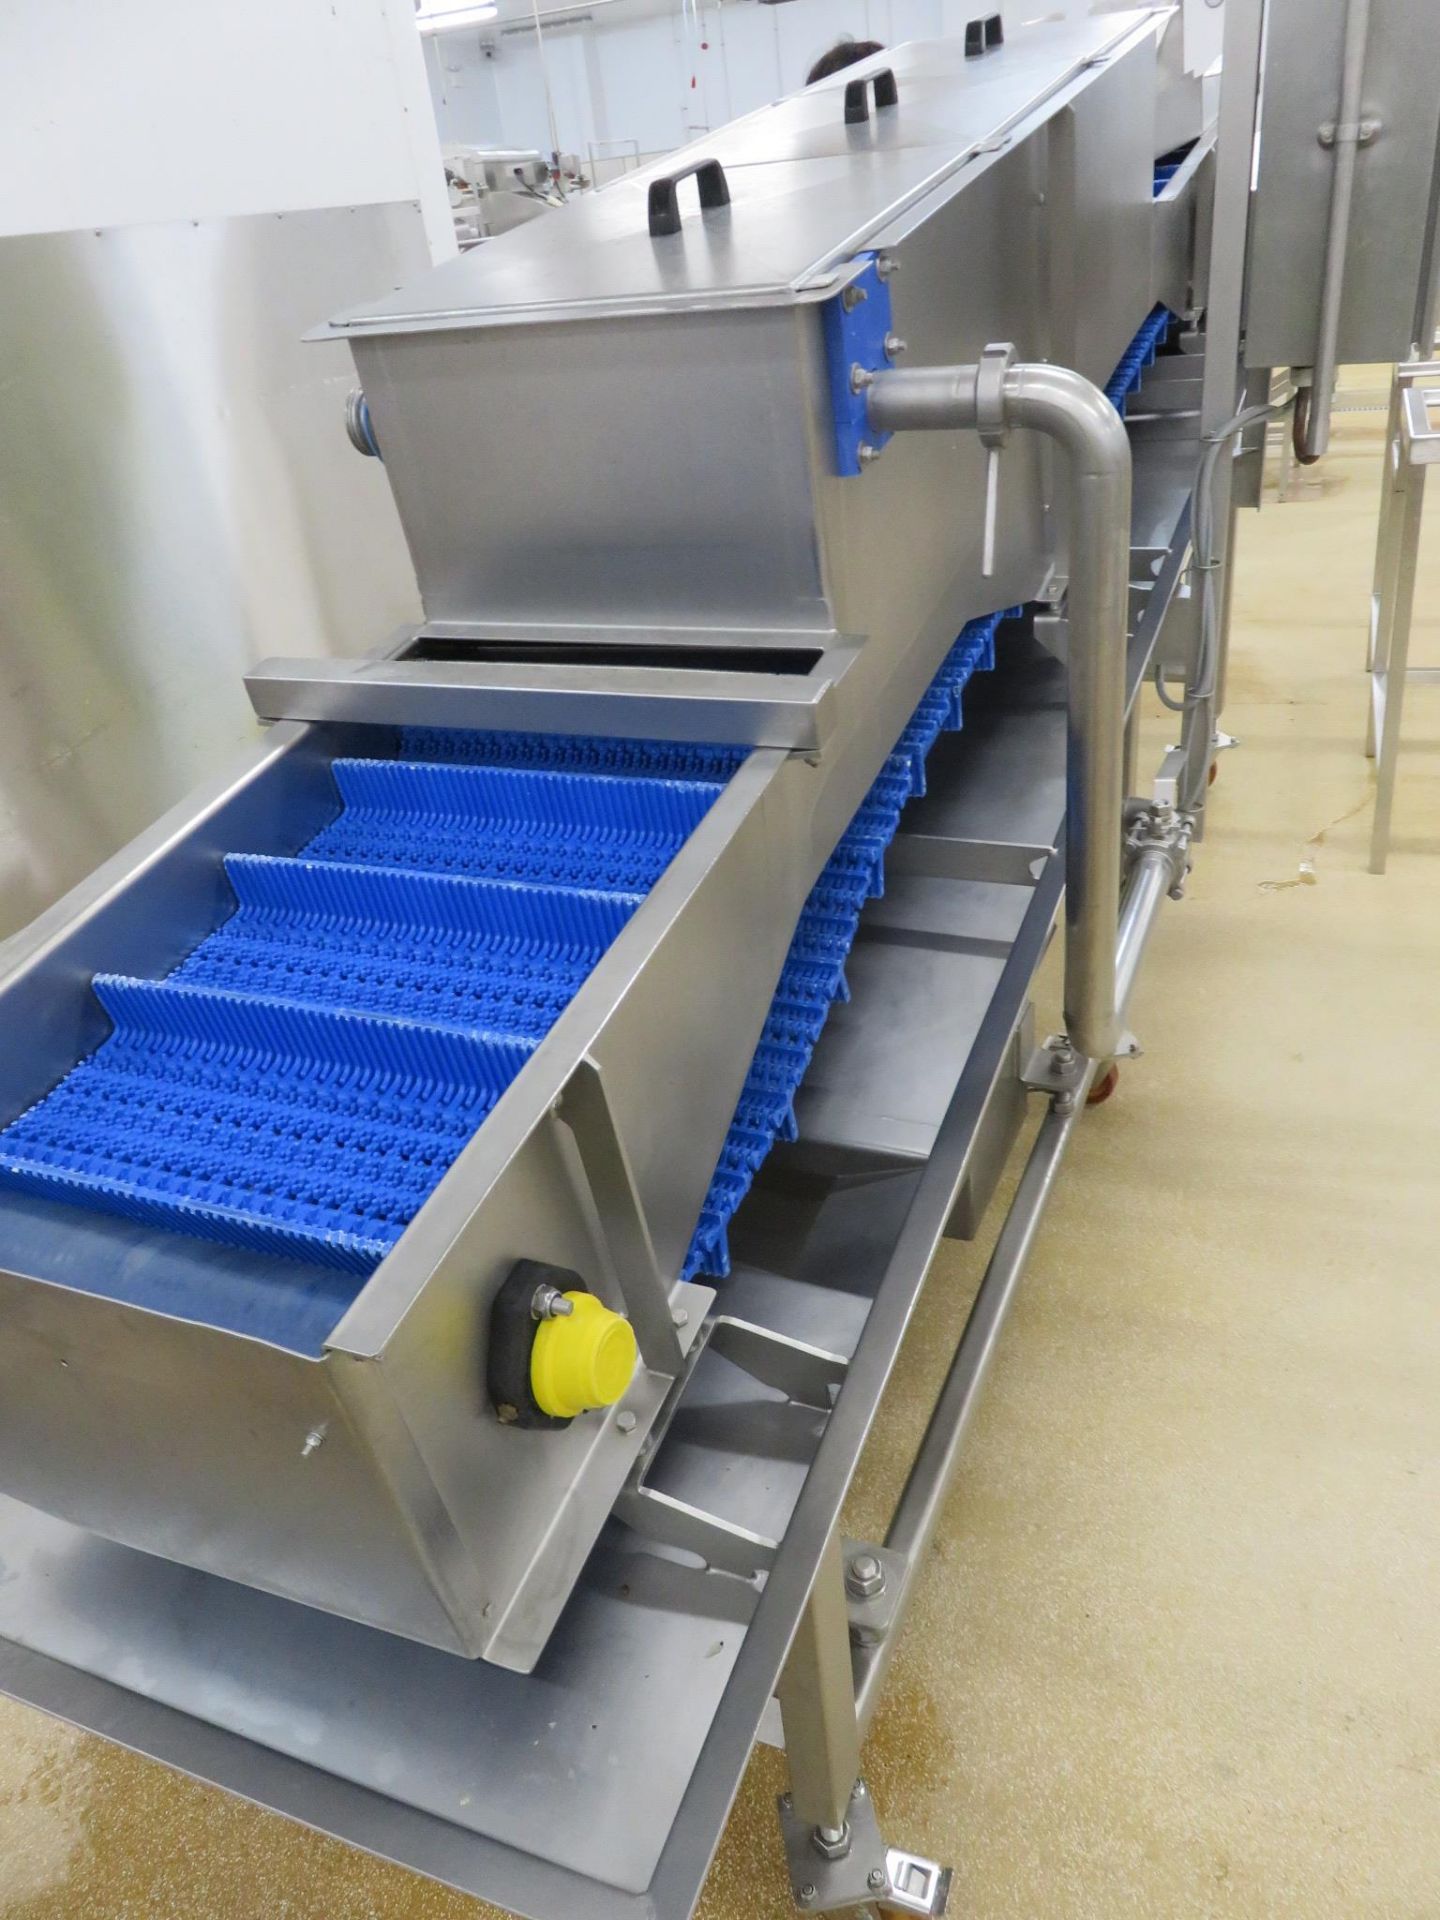 FOOD TECHNOLOGY FLUME WASHER. LO £120. - Image 2 of 6